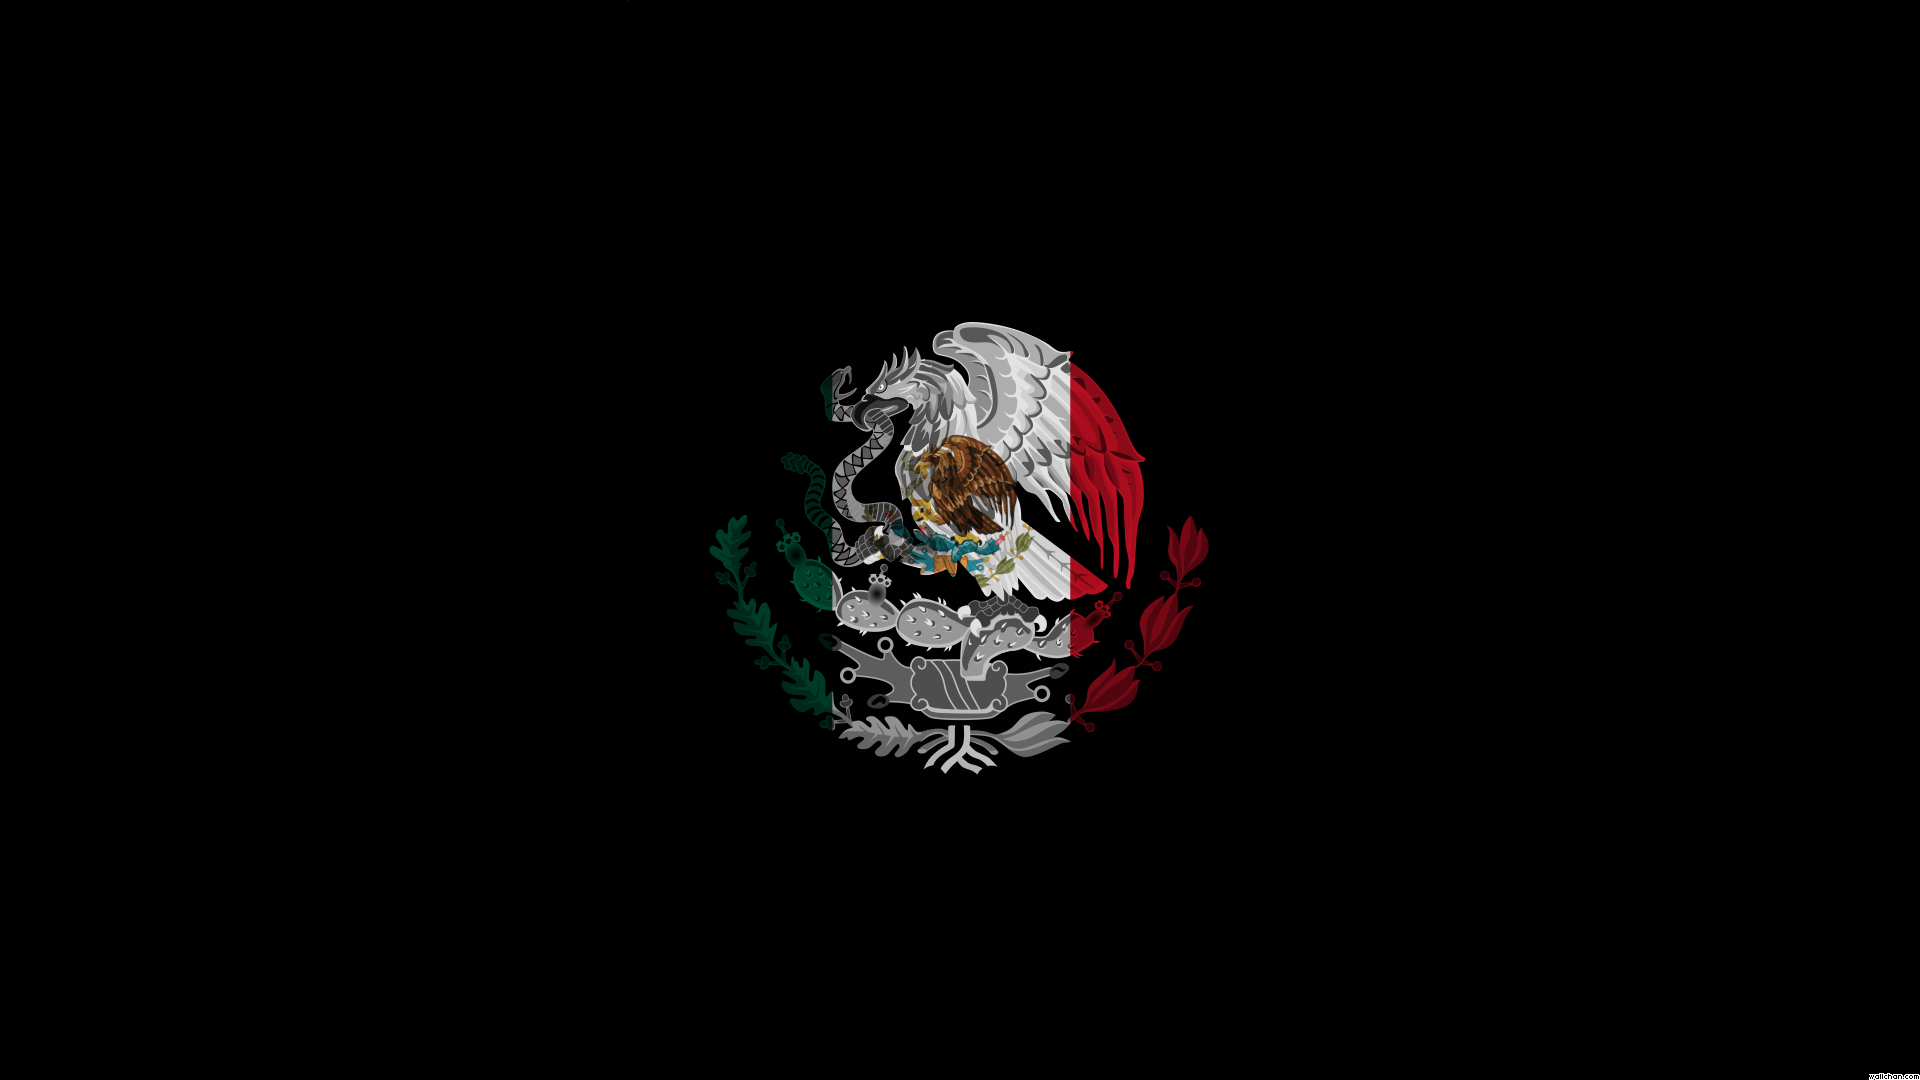 Wallpaper For > Cool Mexican Wallpaper